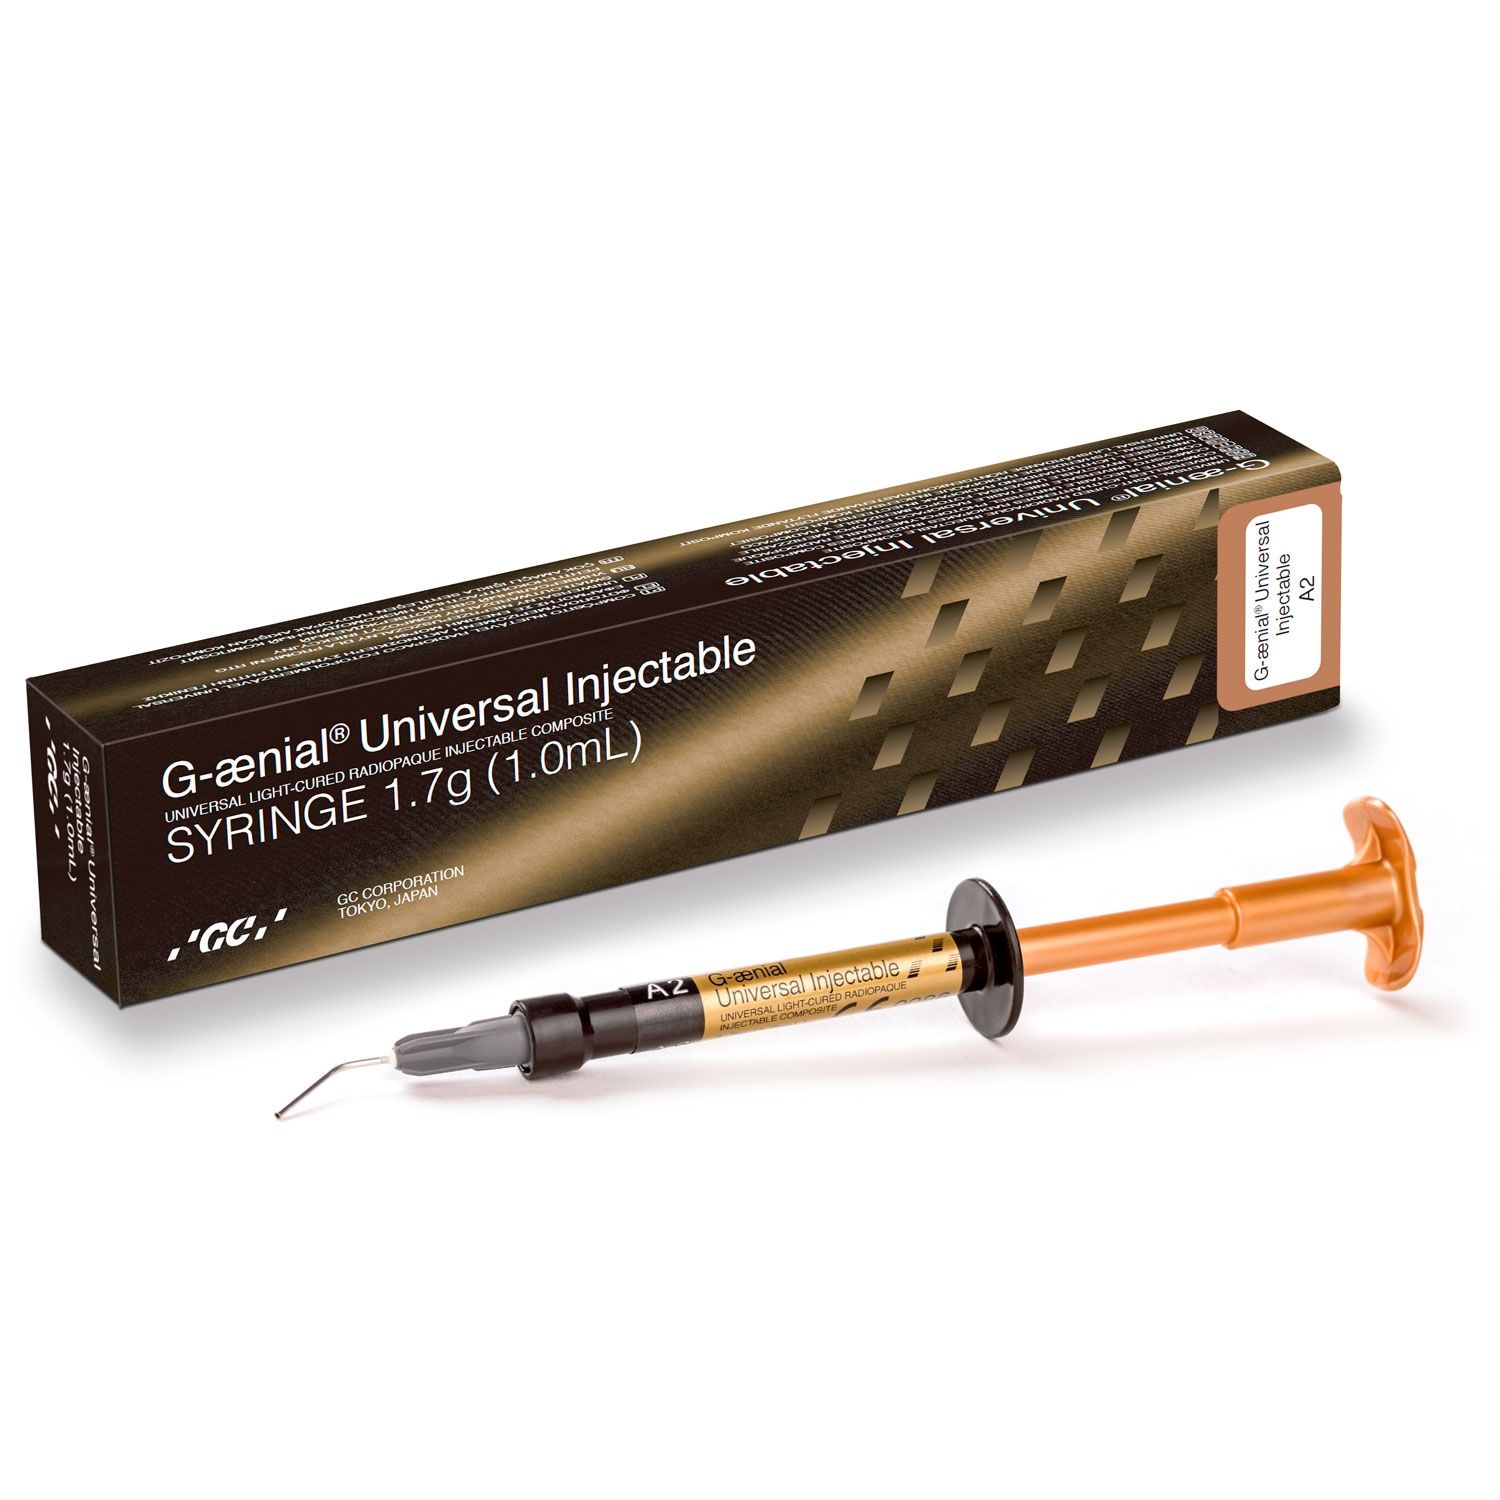 G-aenial Universal Injectable: 1ml Syringe - Shade A2